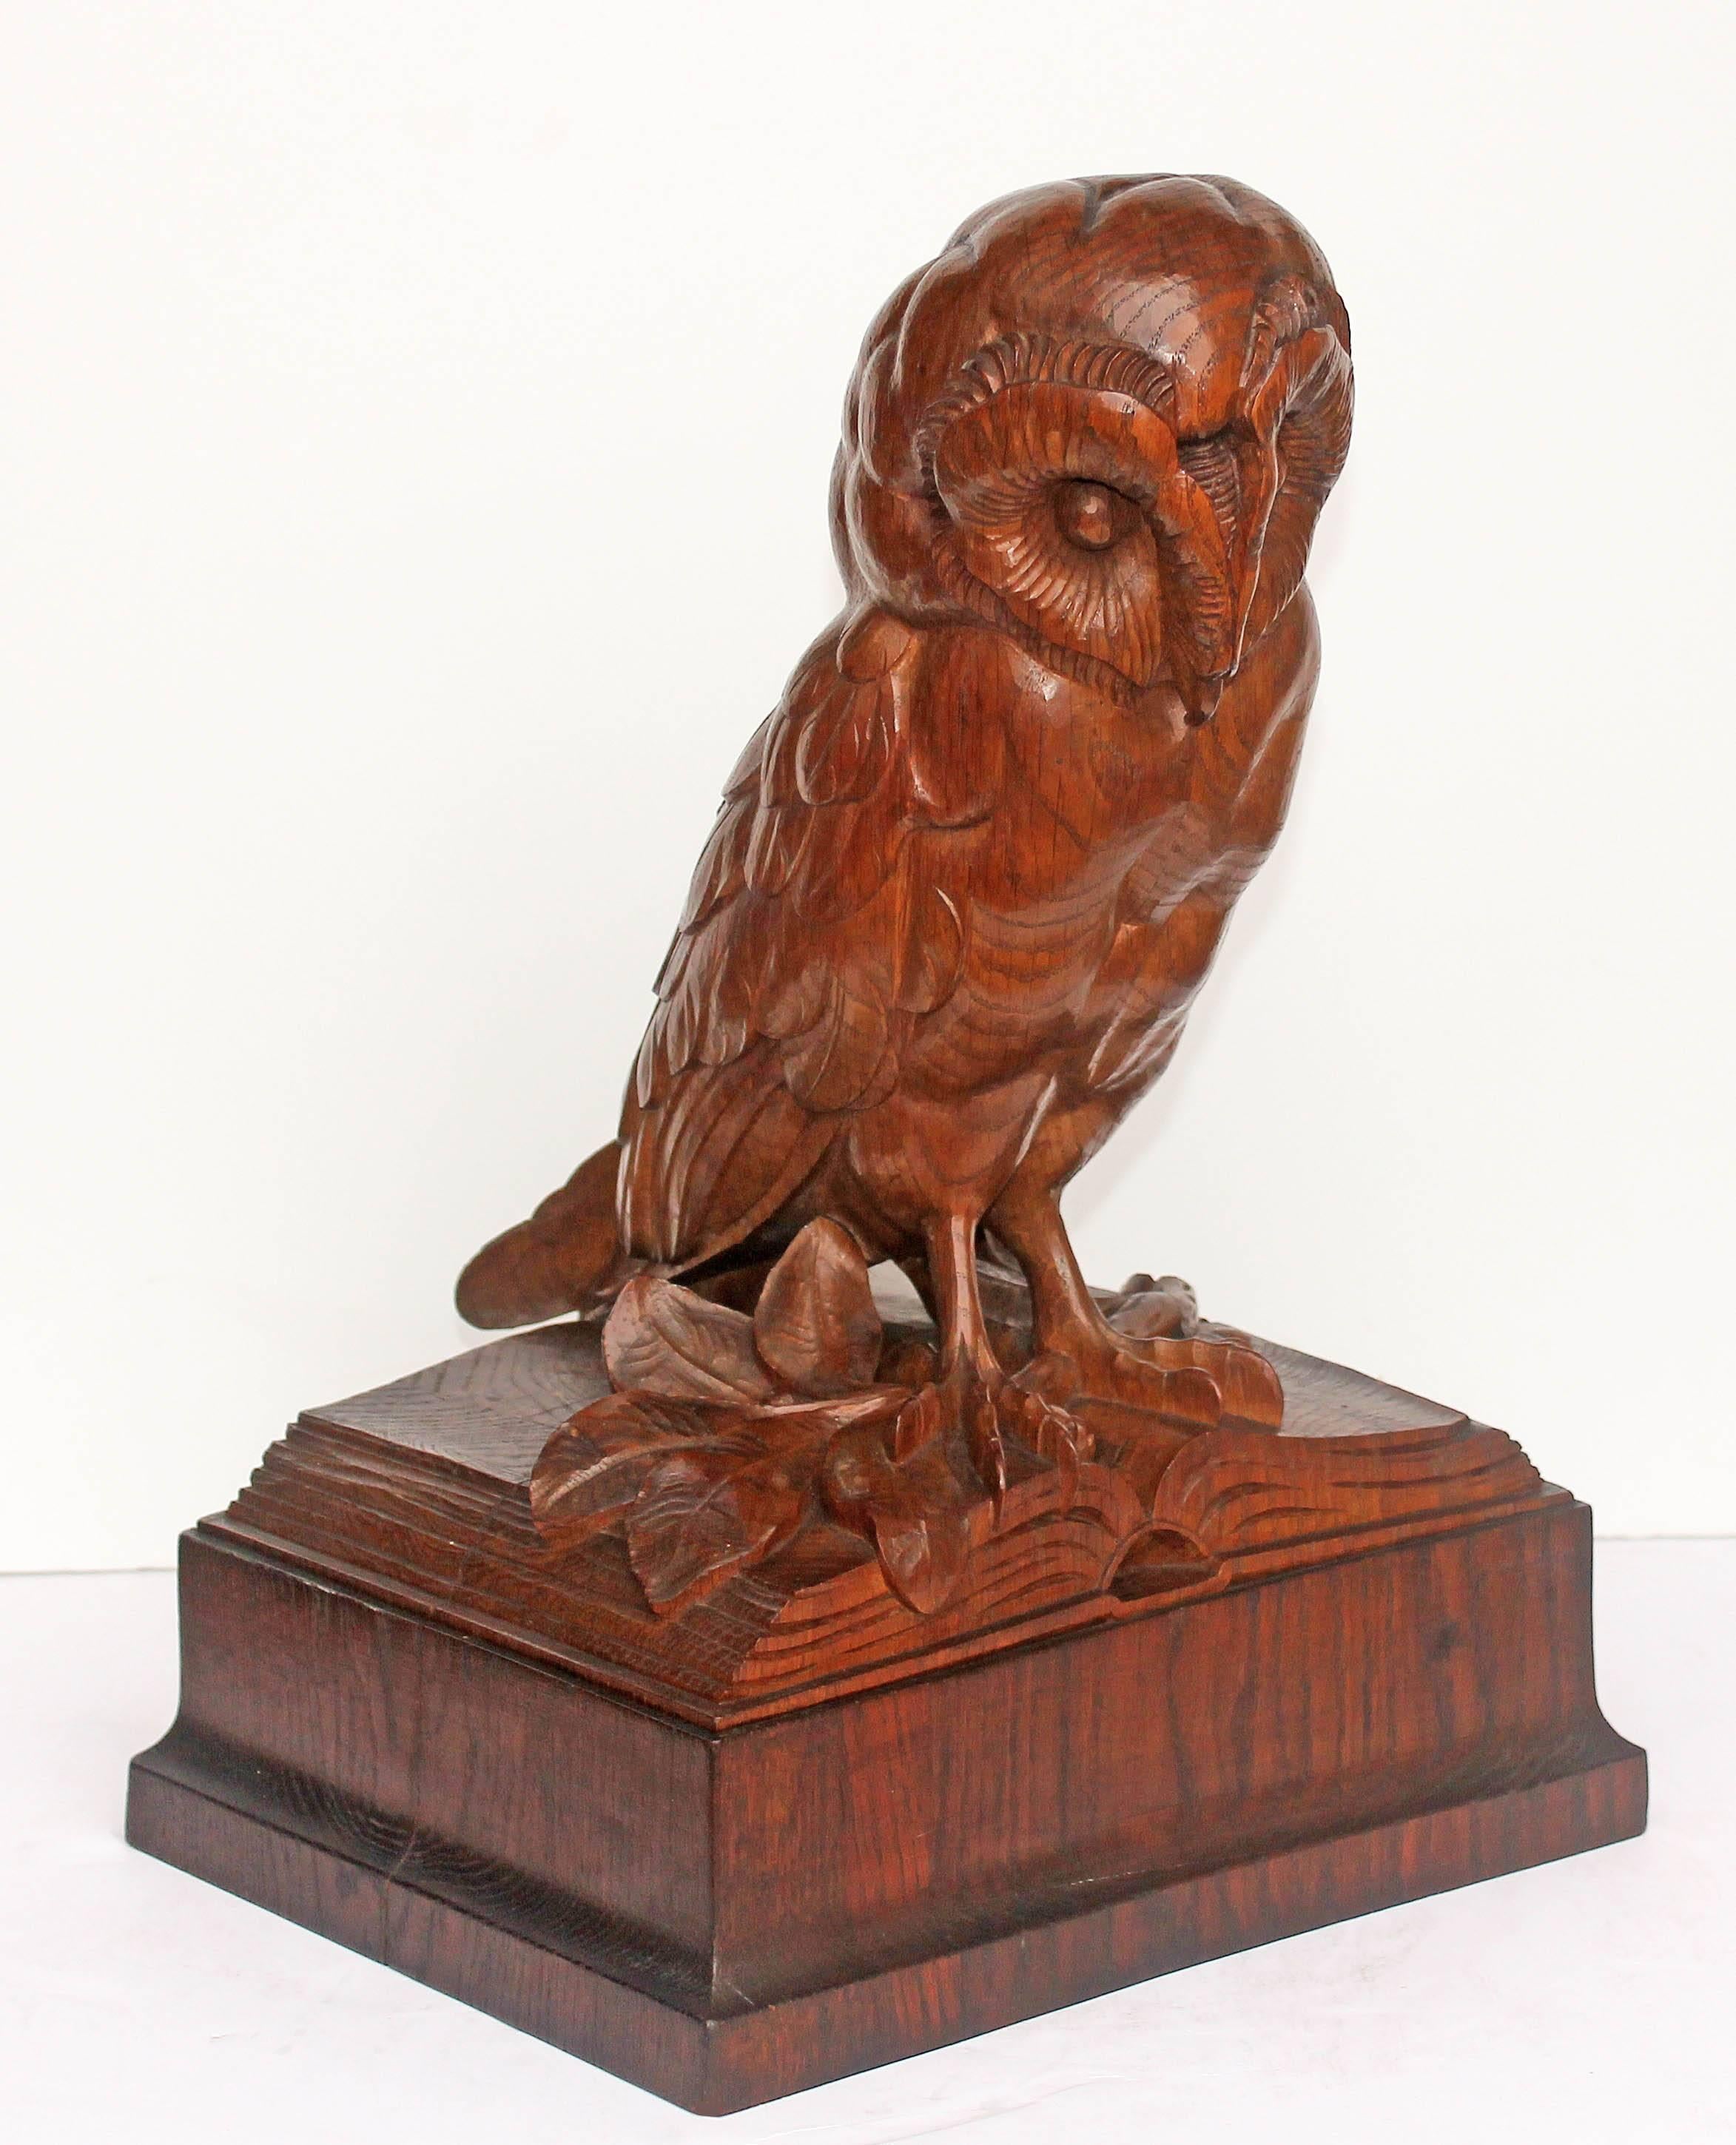 Carved oak library sculpture "Knowledge"  by American modernist  William Ehrich. An early work by the artist. Unsigned. This was the artists first sculture in wood. Provenance: illustrated on his son's website, "Ehrich.us"
